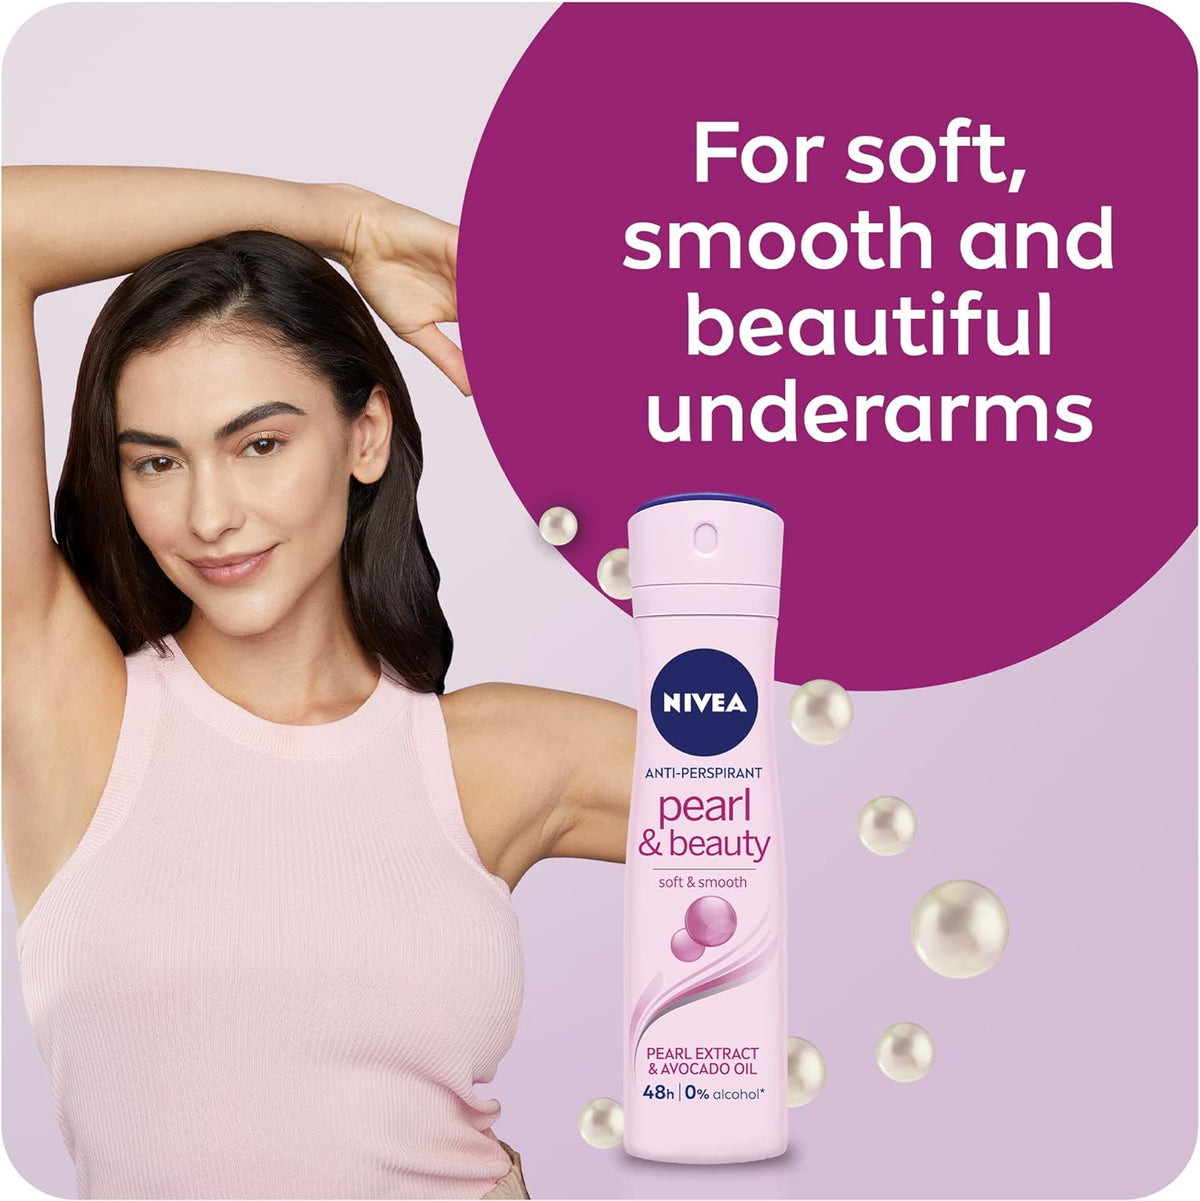 NIVEA Antiperspirant Spray for Women, Pearl & Beauty Pearl Extracts, 150ml